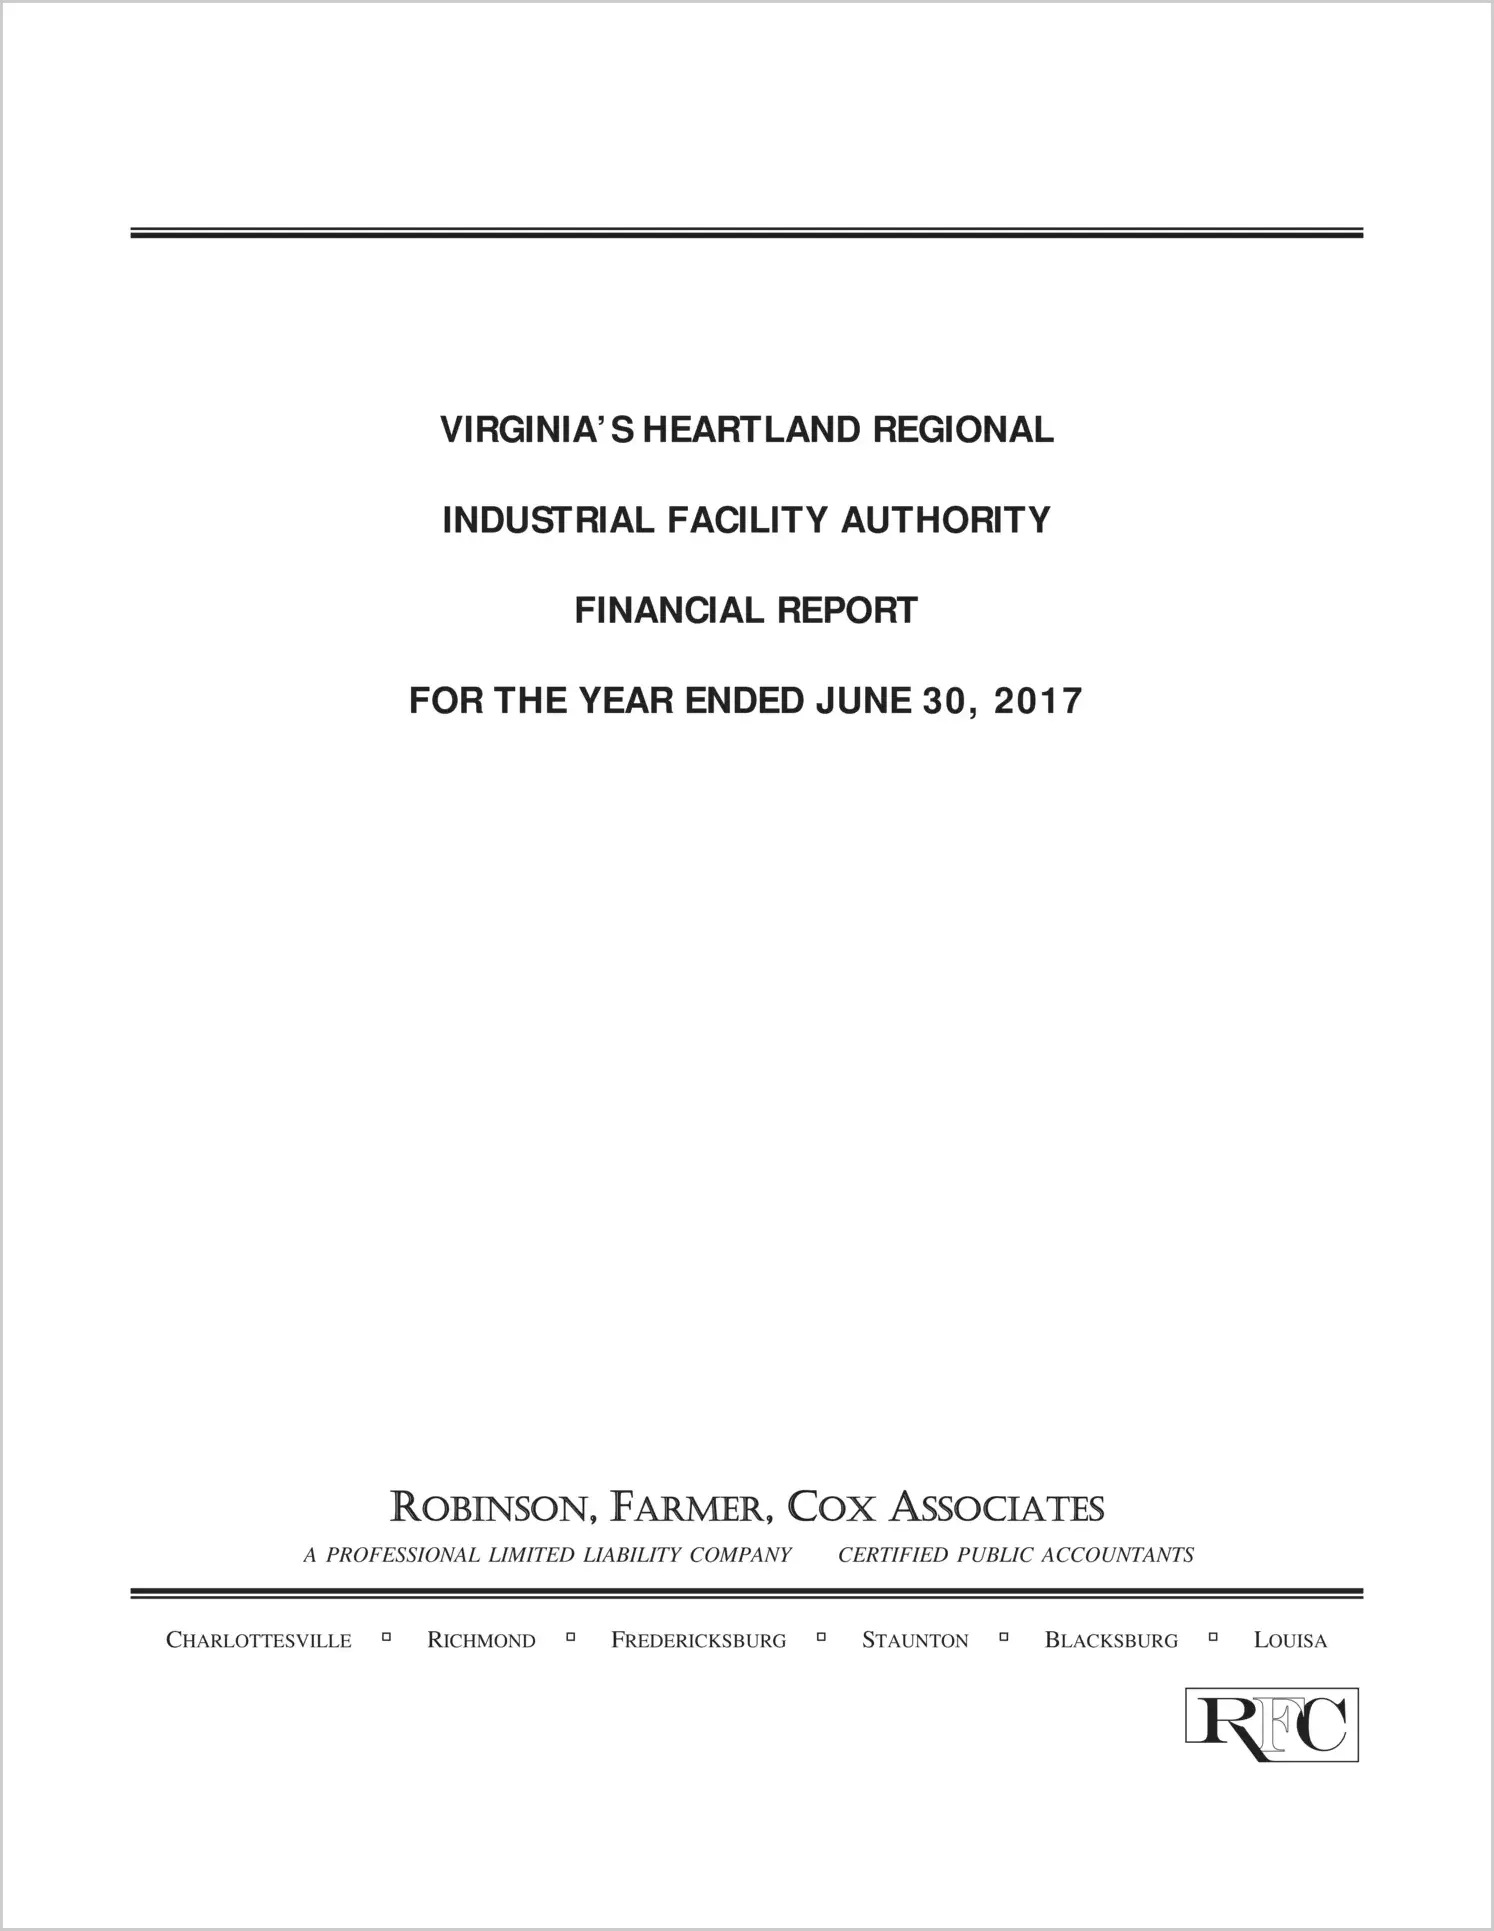 2017 Other Annual Financial Report for Virginia Heartland Regional Industrial Facility Authority